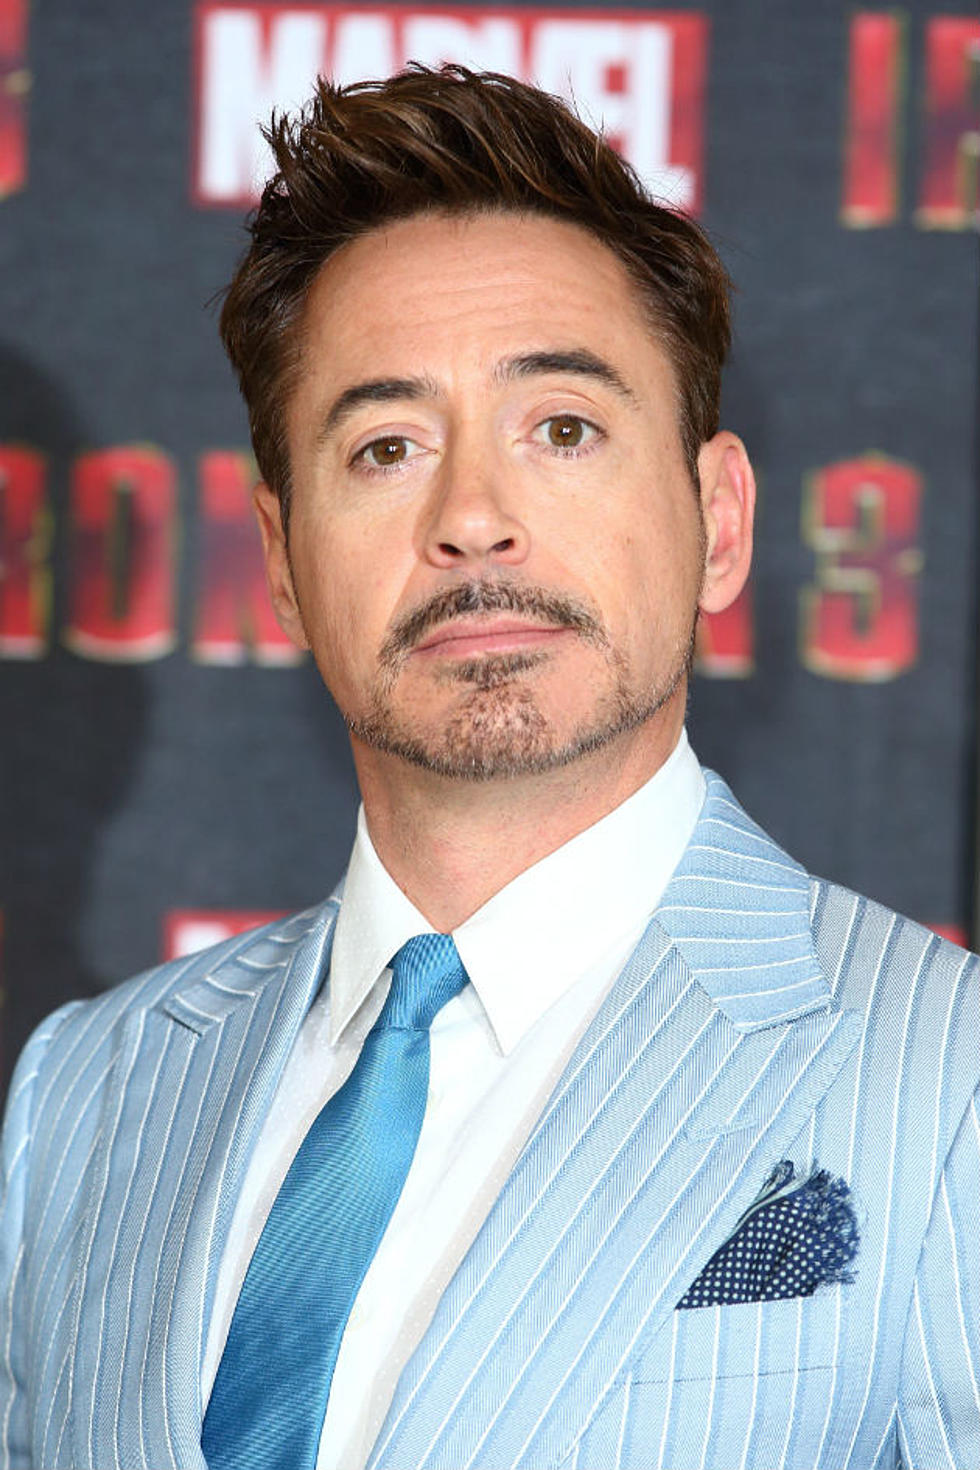 Robert Downey Jr. Delivers Real Bionic Arm to Young Boy – Awesome!